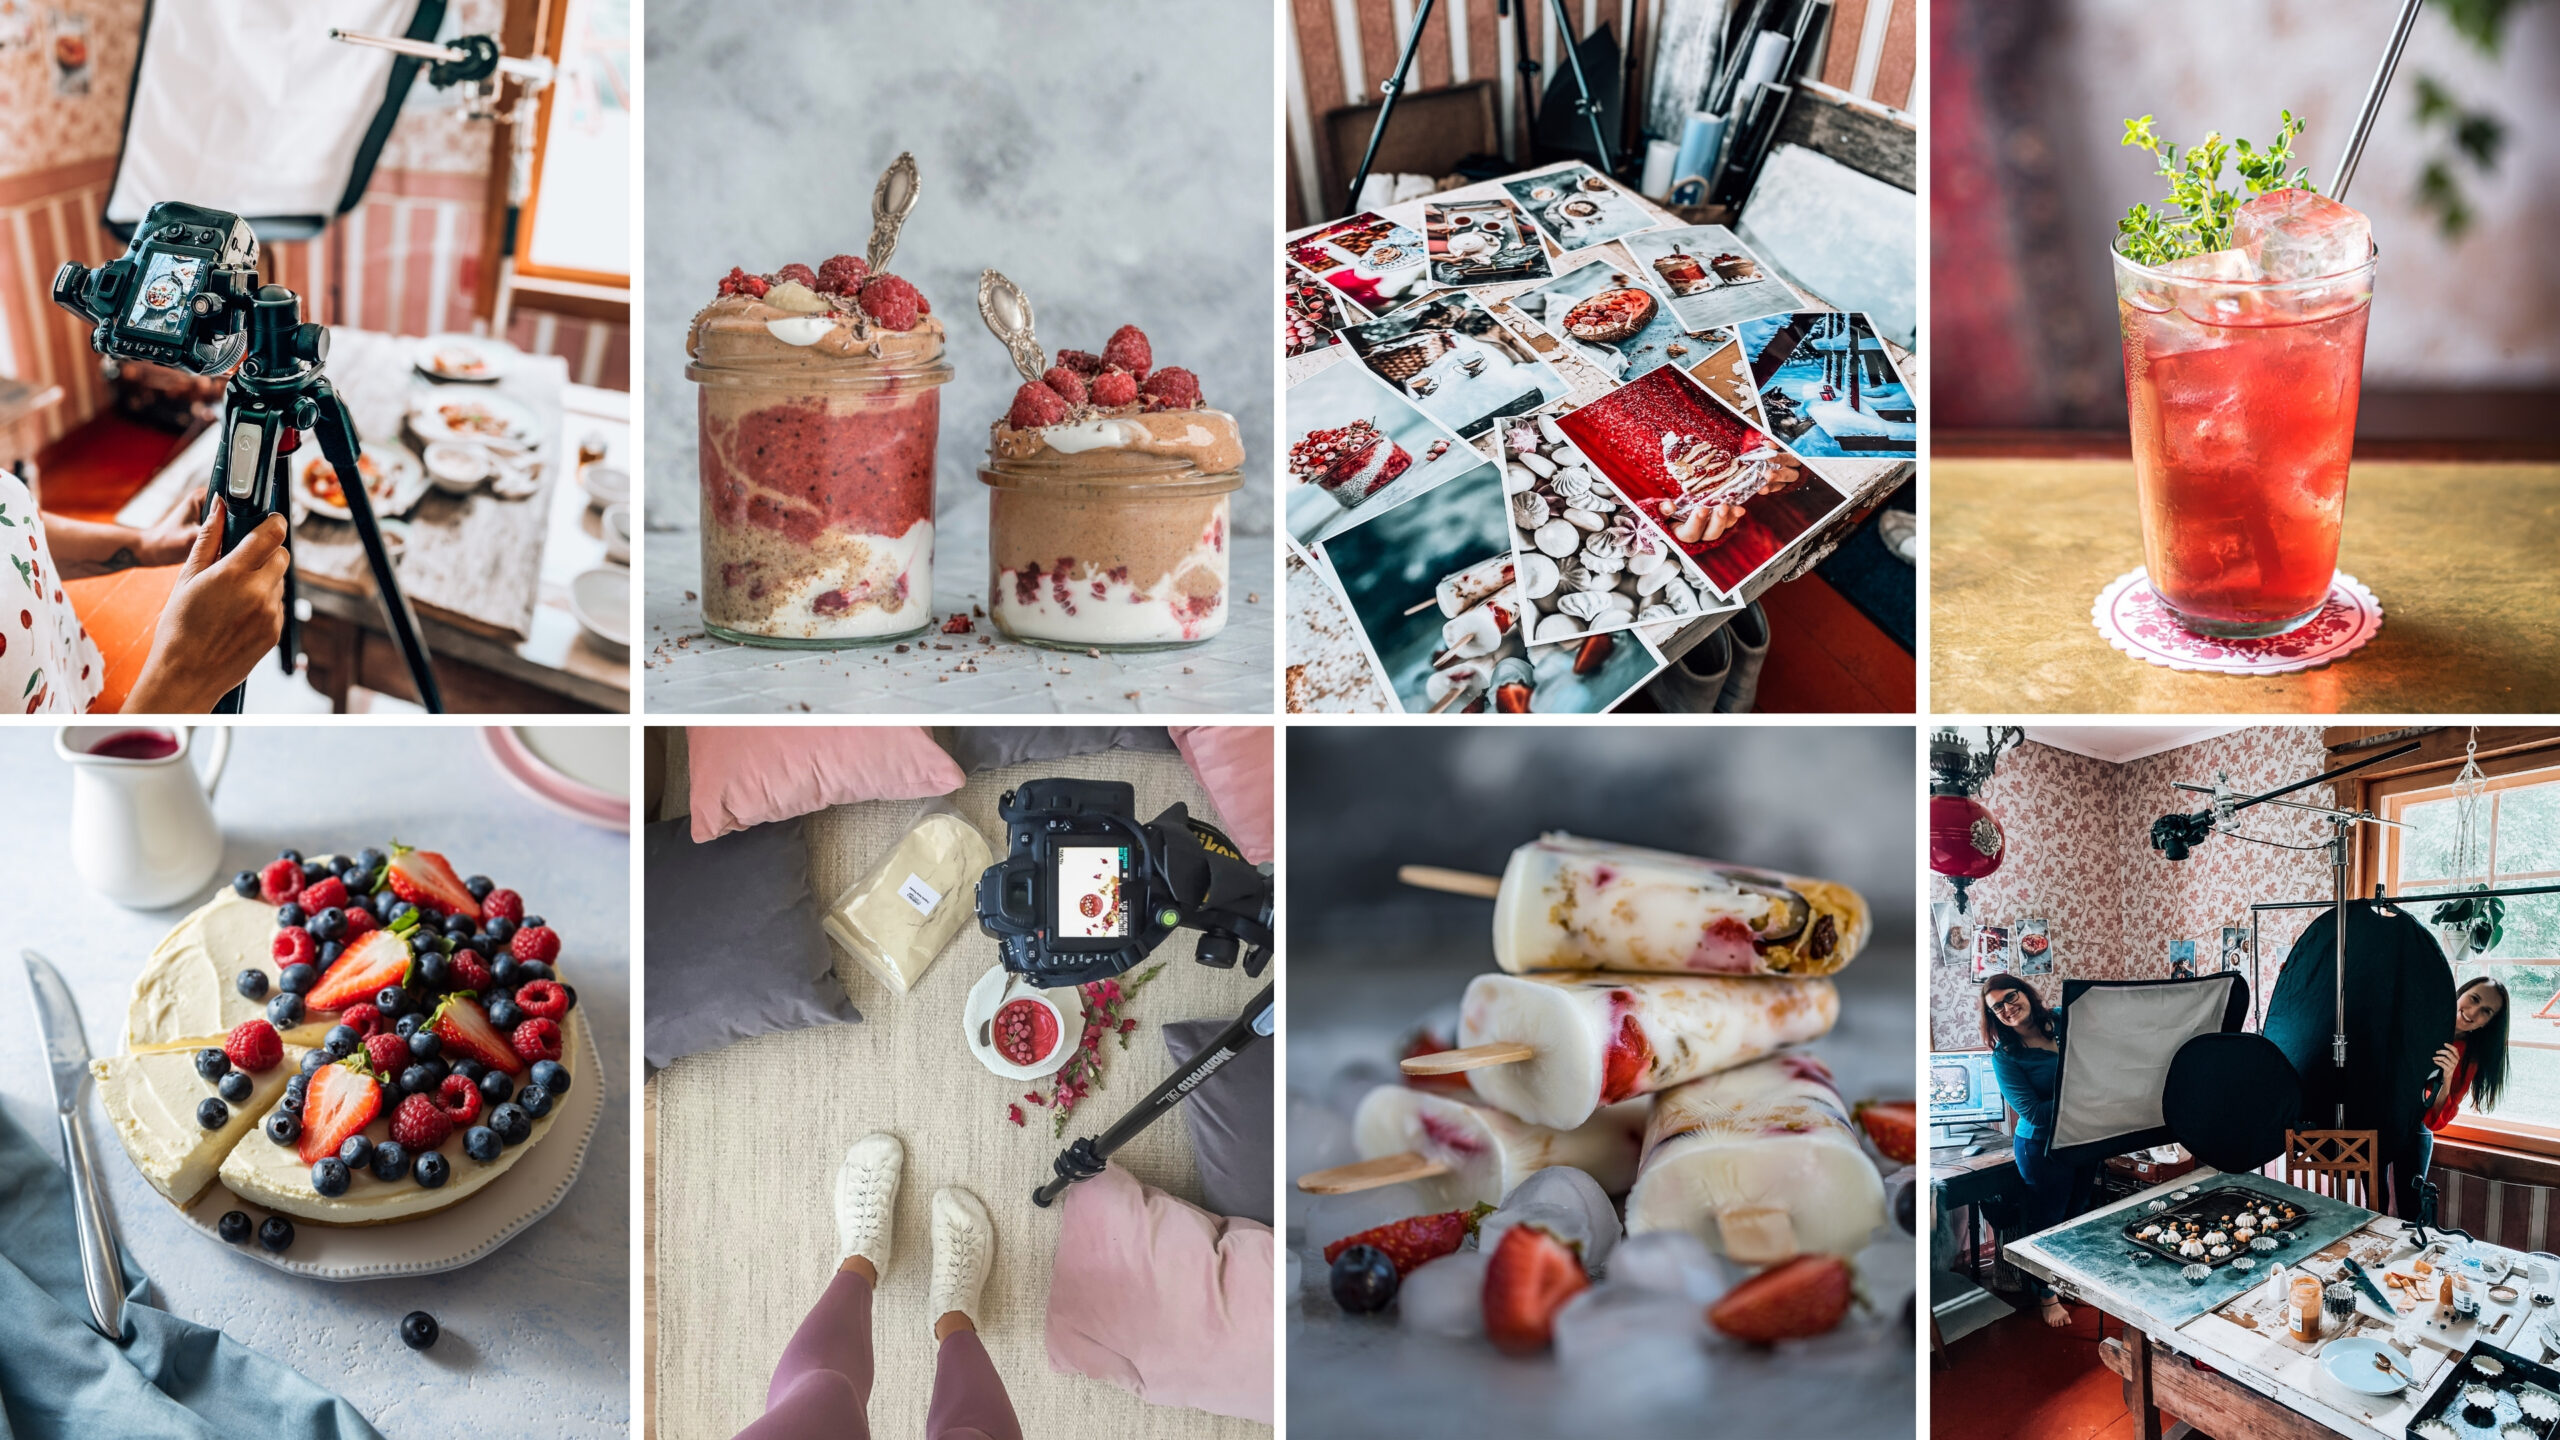 Modern food photography portfolios that showcases the latest trends and techniques in food photography: